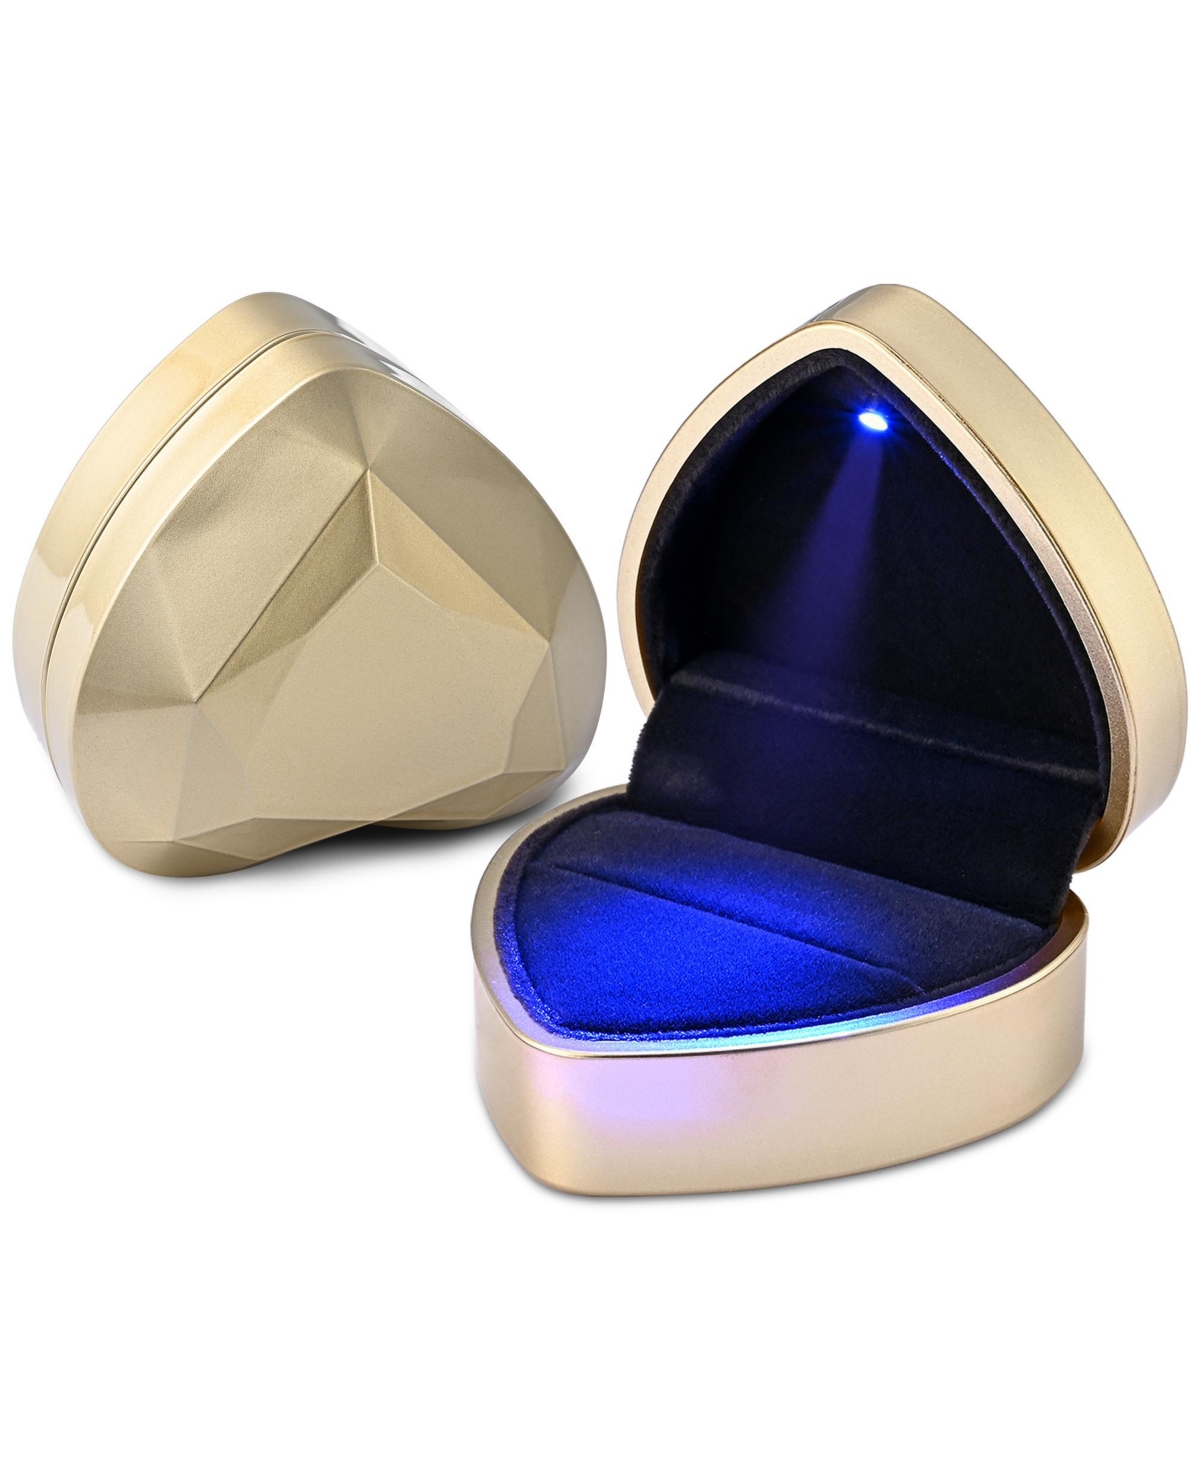 Heart Shape Led Ring Box Jewelry Wedding Engagement Proposal Lighted Case 2 Pack - Gold